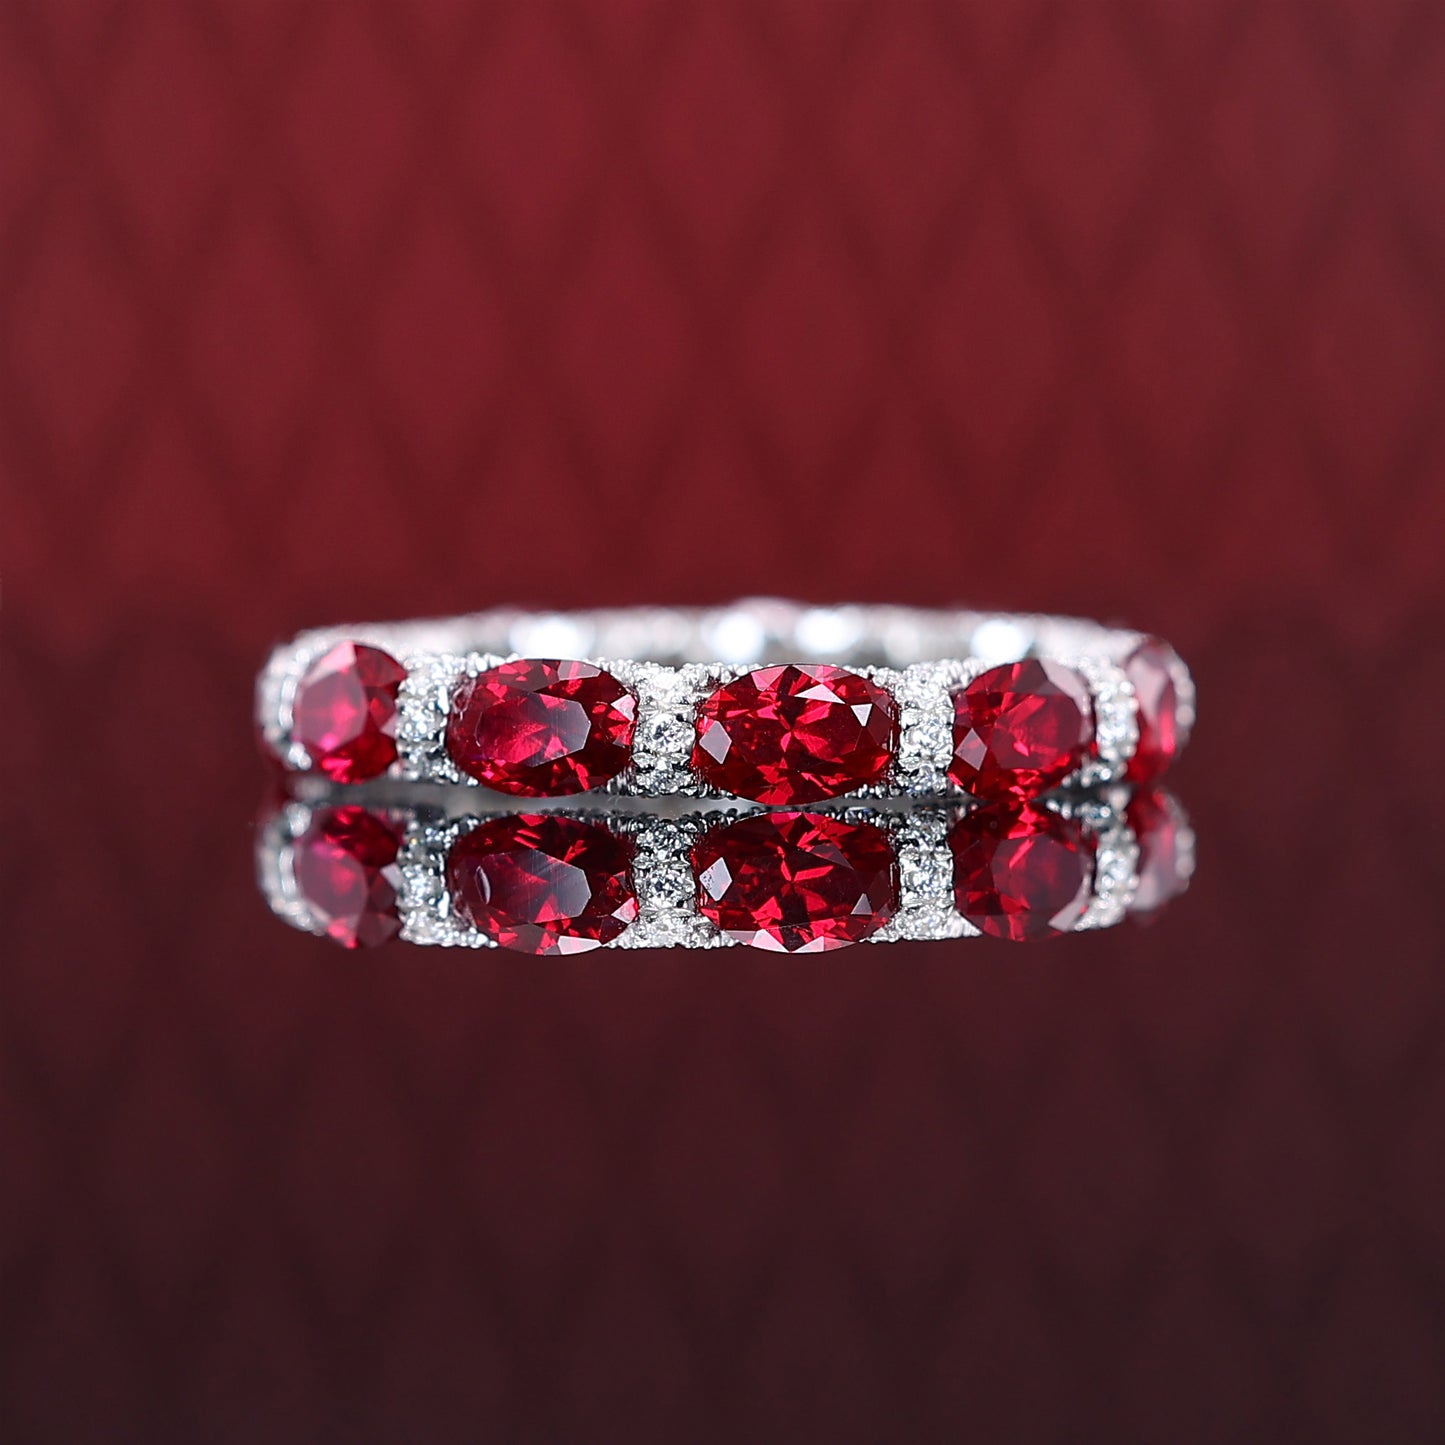 Micro-setting  Ruby color Lab created stones detailed band ring, sterling silver